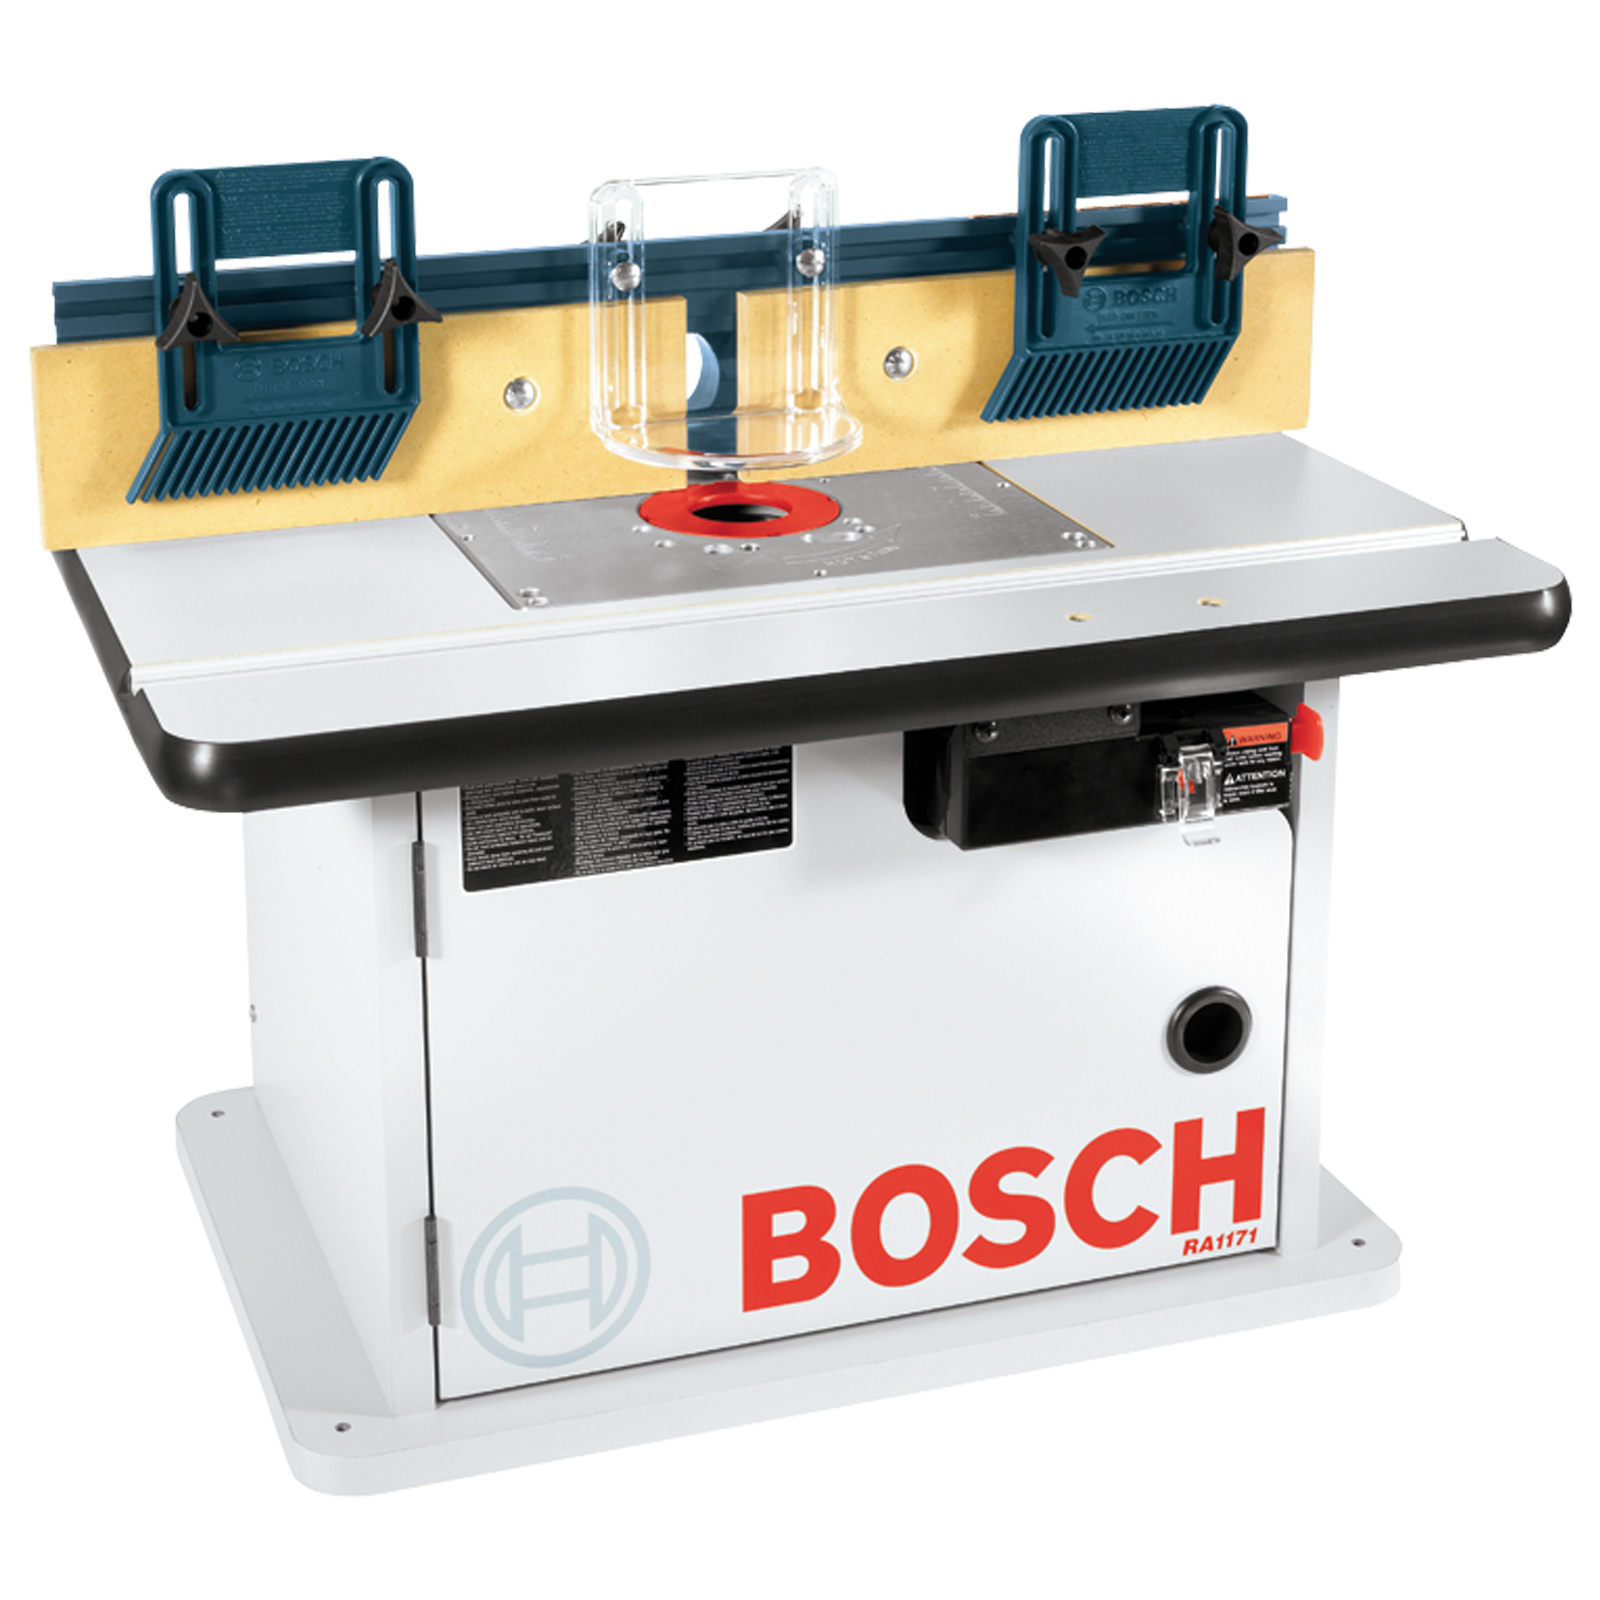 Bosch RA1171 Laminated Cabinet Style Router Table